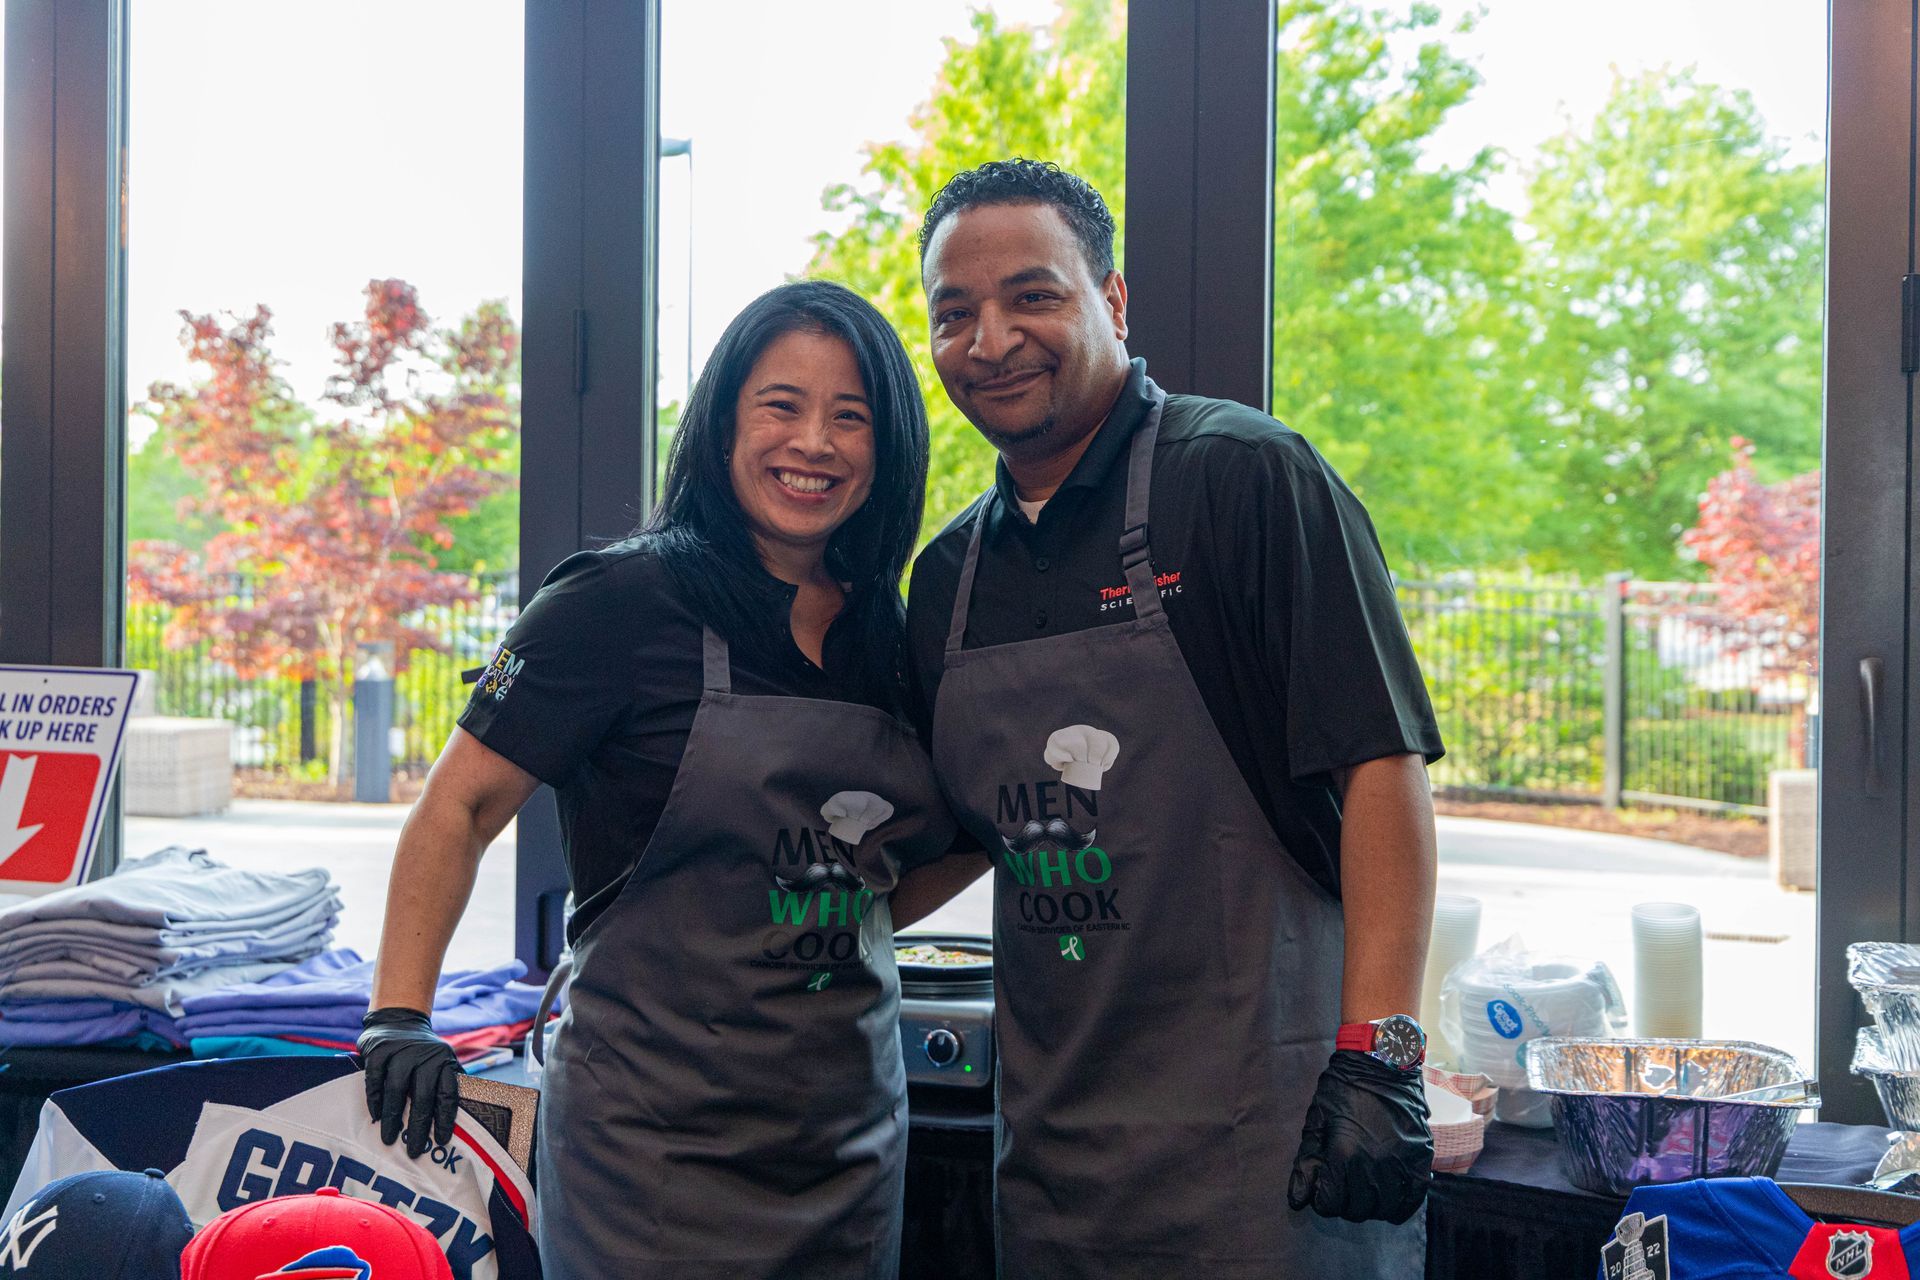 a man and a woman wearing aprons are posing for a picture .